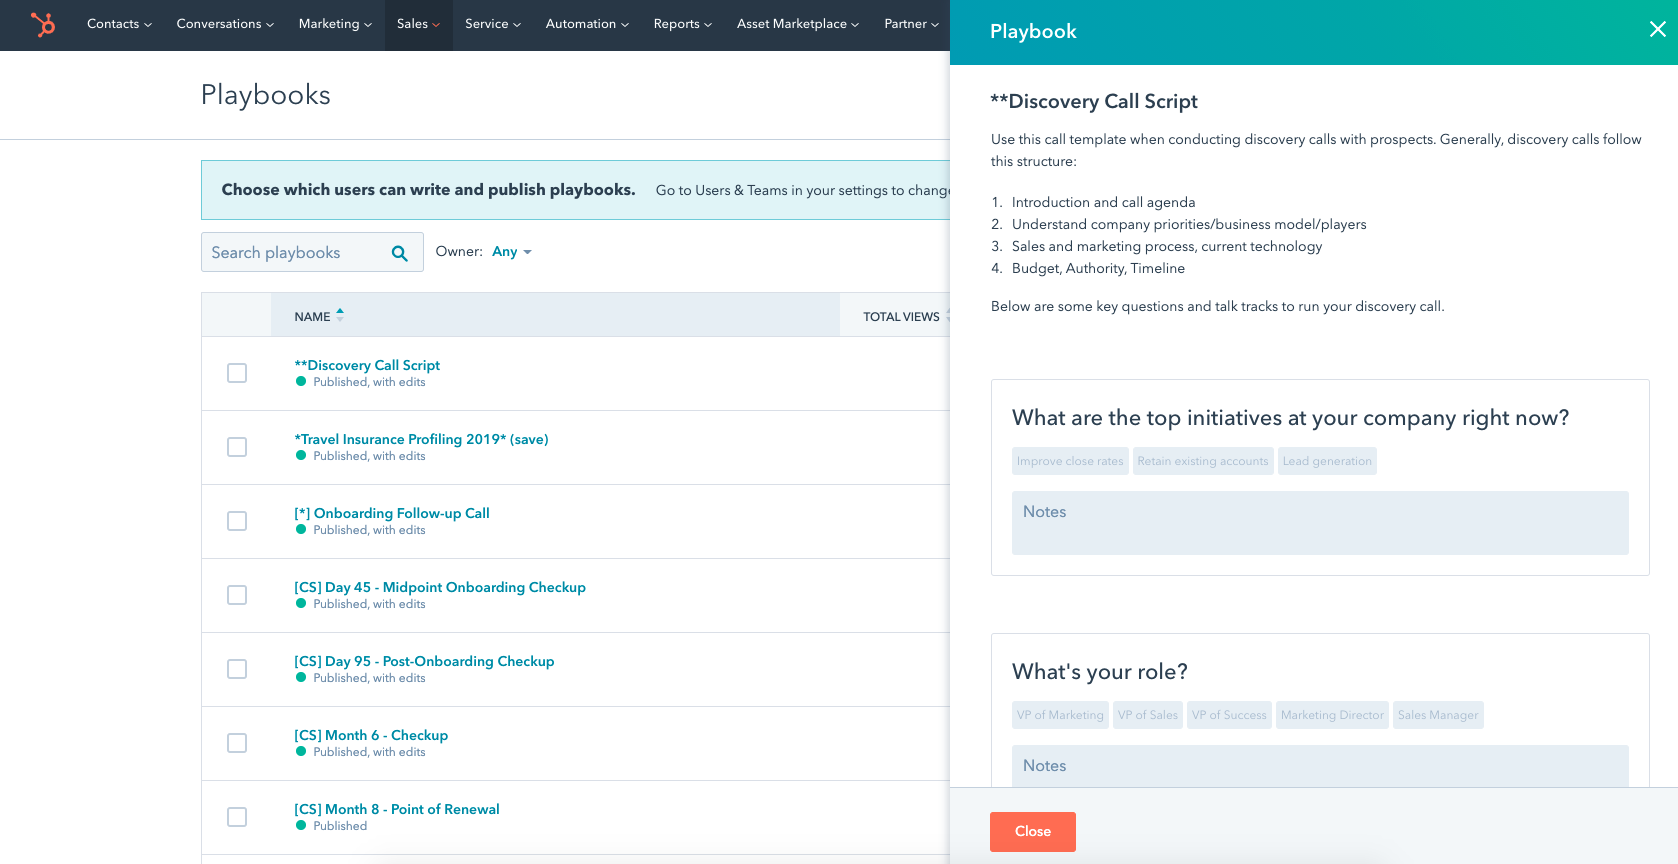 HubSpot playbooks interface showing notes options